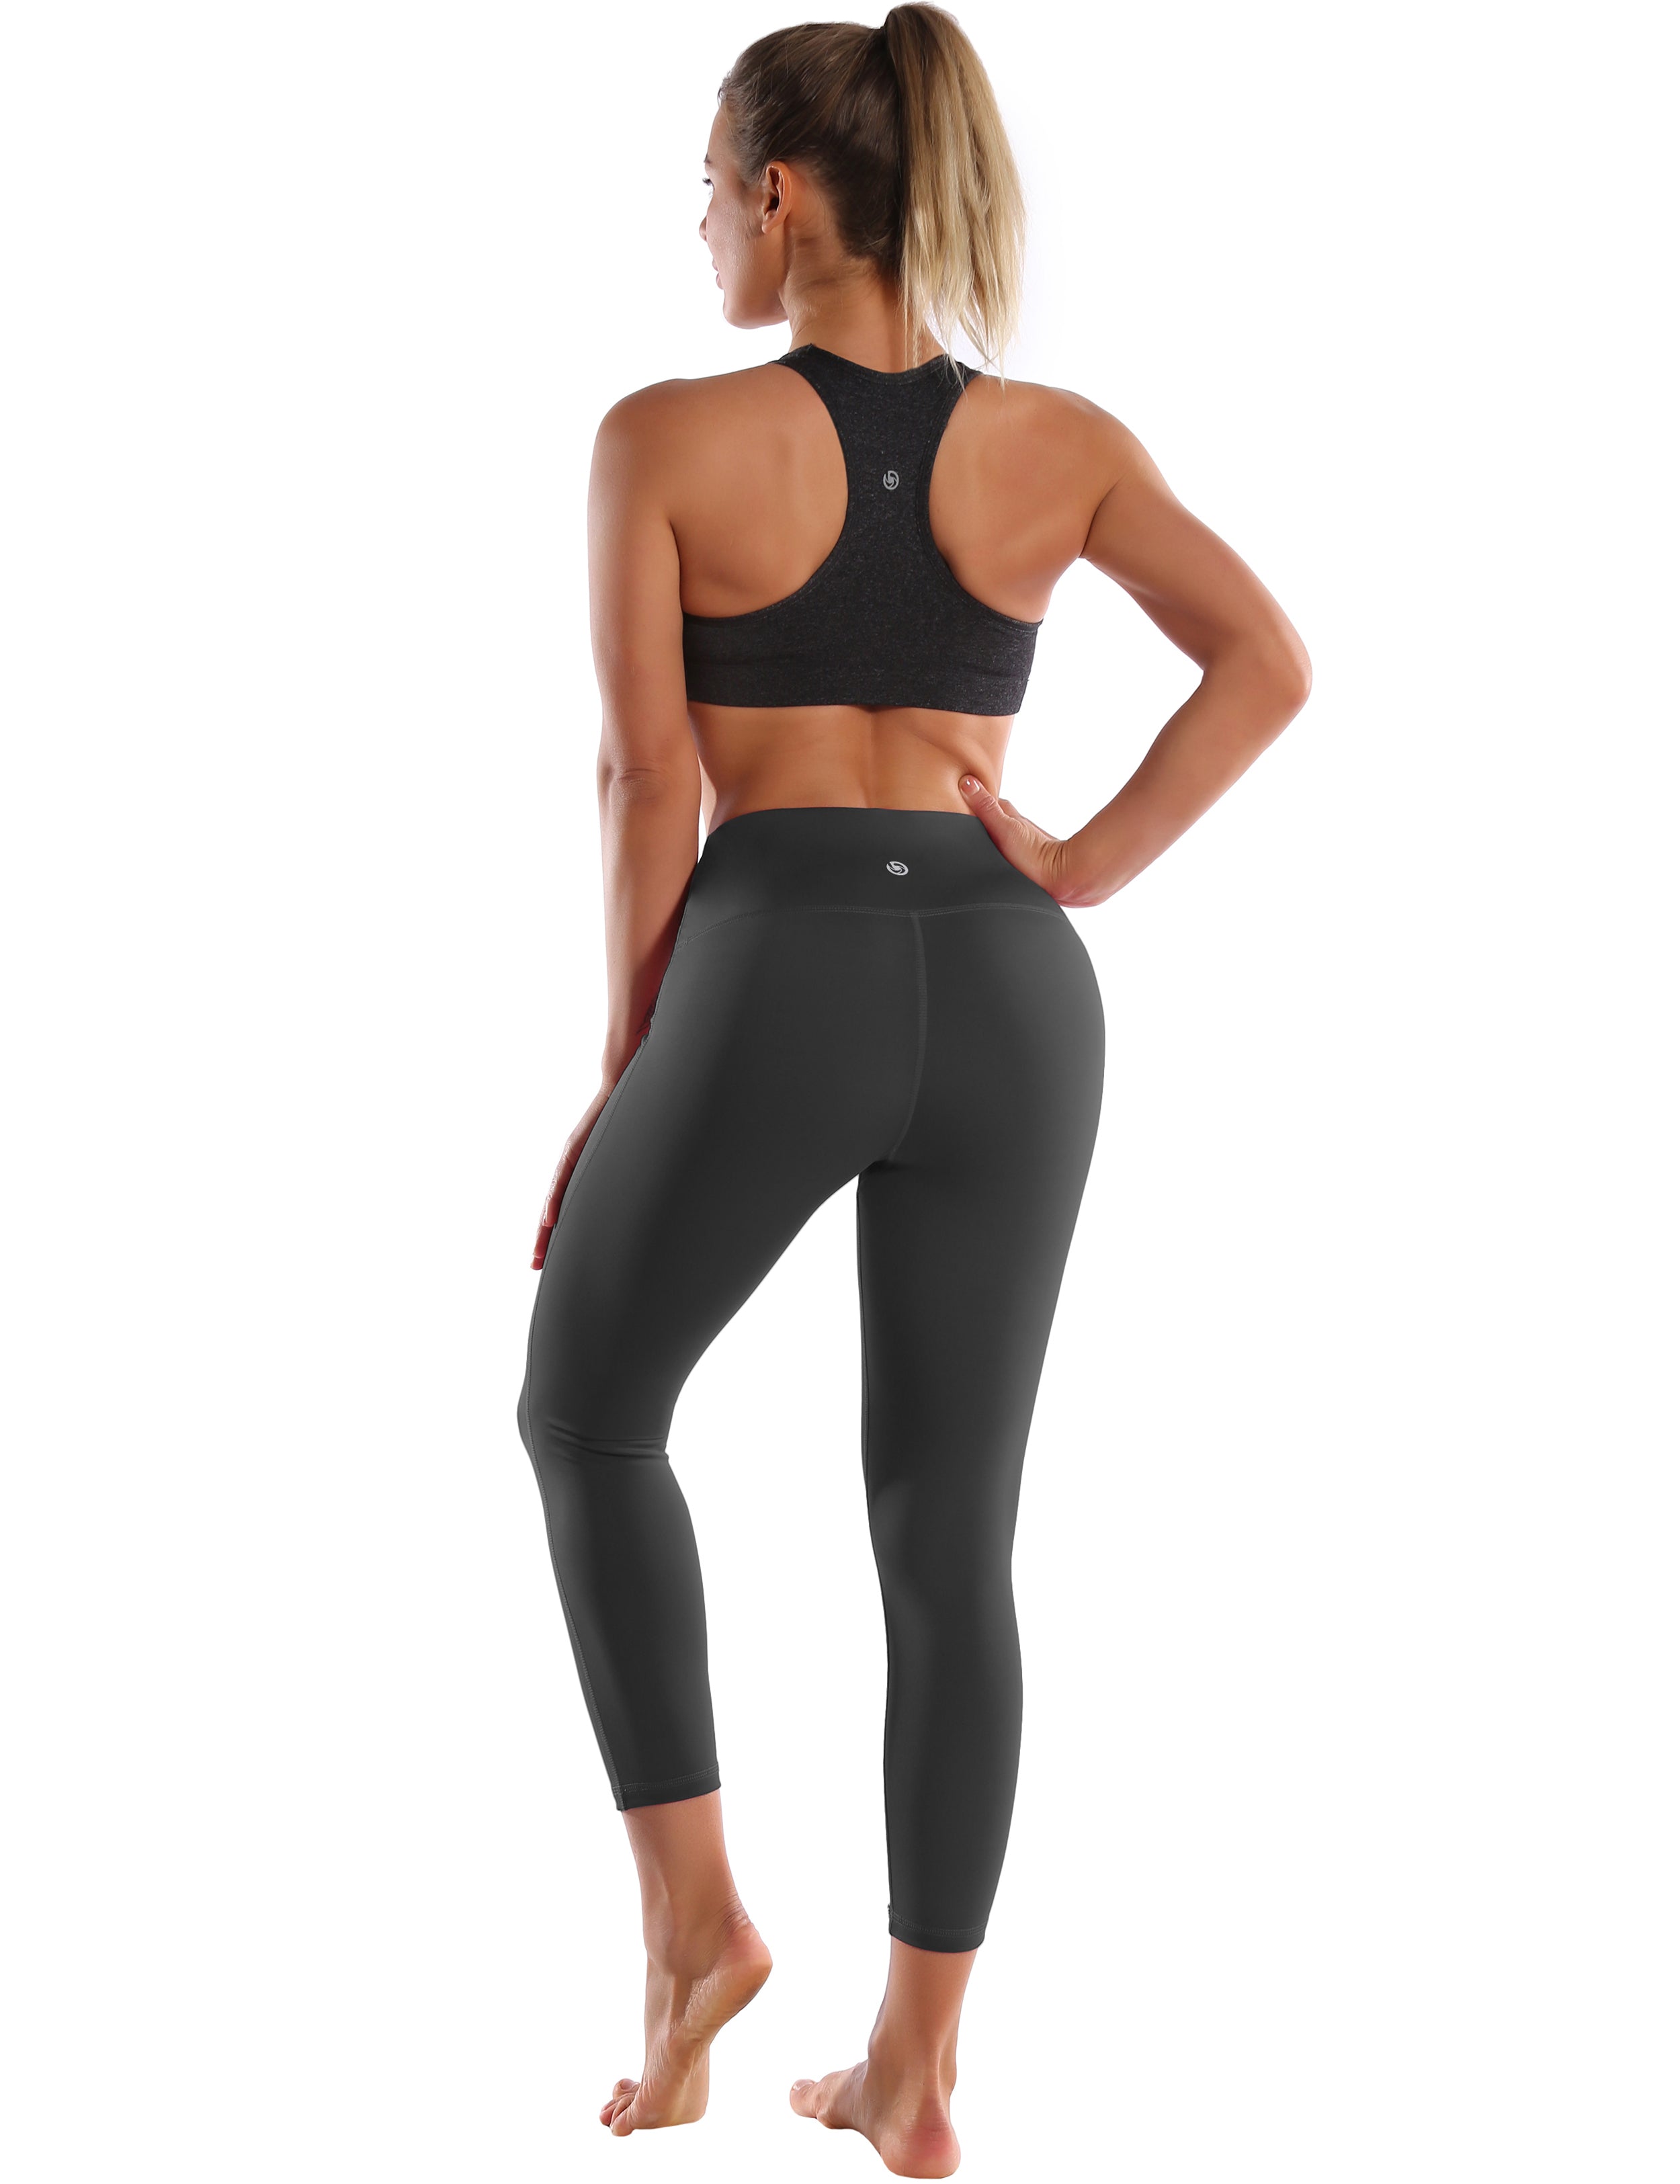 22" High Waist Side Line Capris shadowcharcoal 75%Nylon/25%Spandex Fabric doesn't attract lint easily 4-way stretch No see-through Moisture-wicking Tummy control Inner pocket